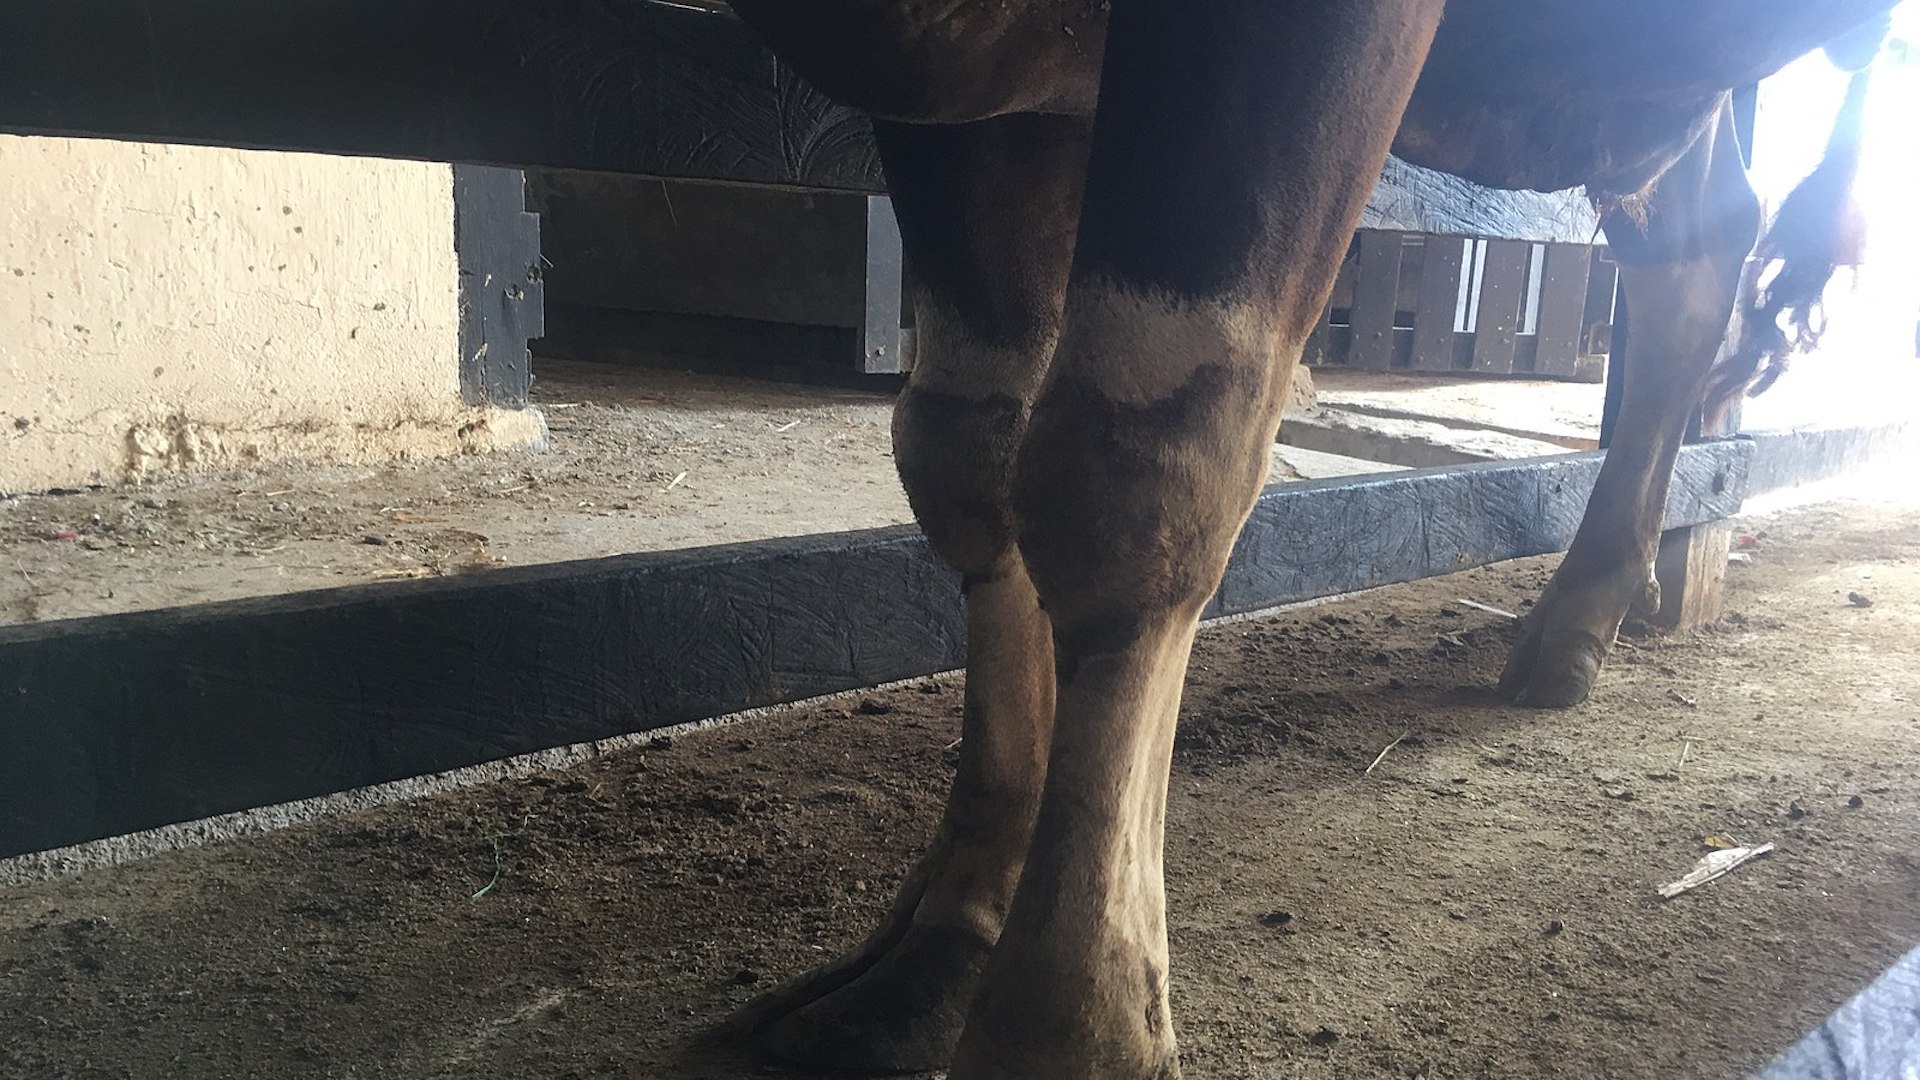 a close-up photo of the swollen knees of a cow that's standing in a barn